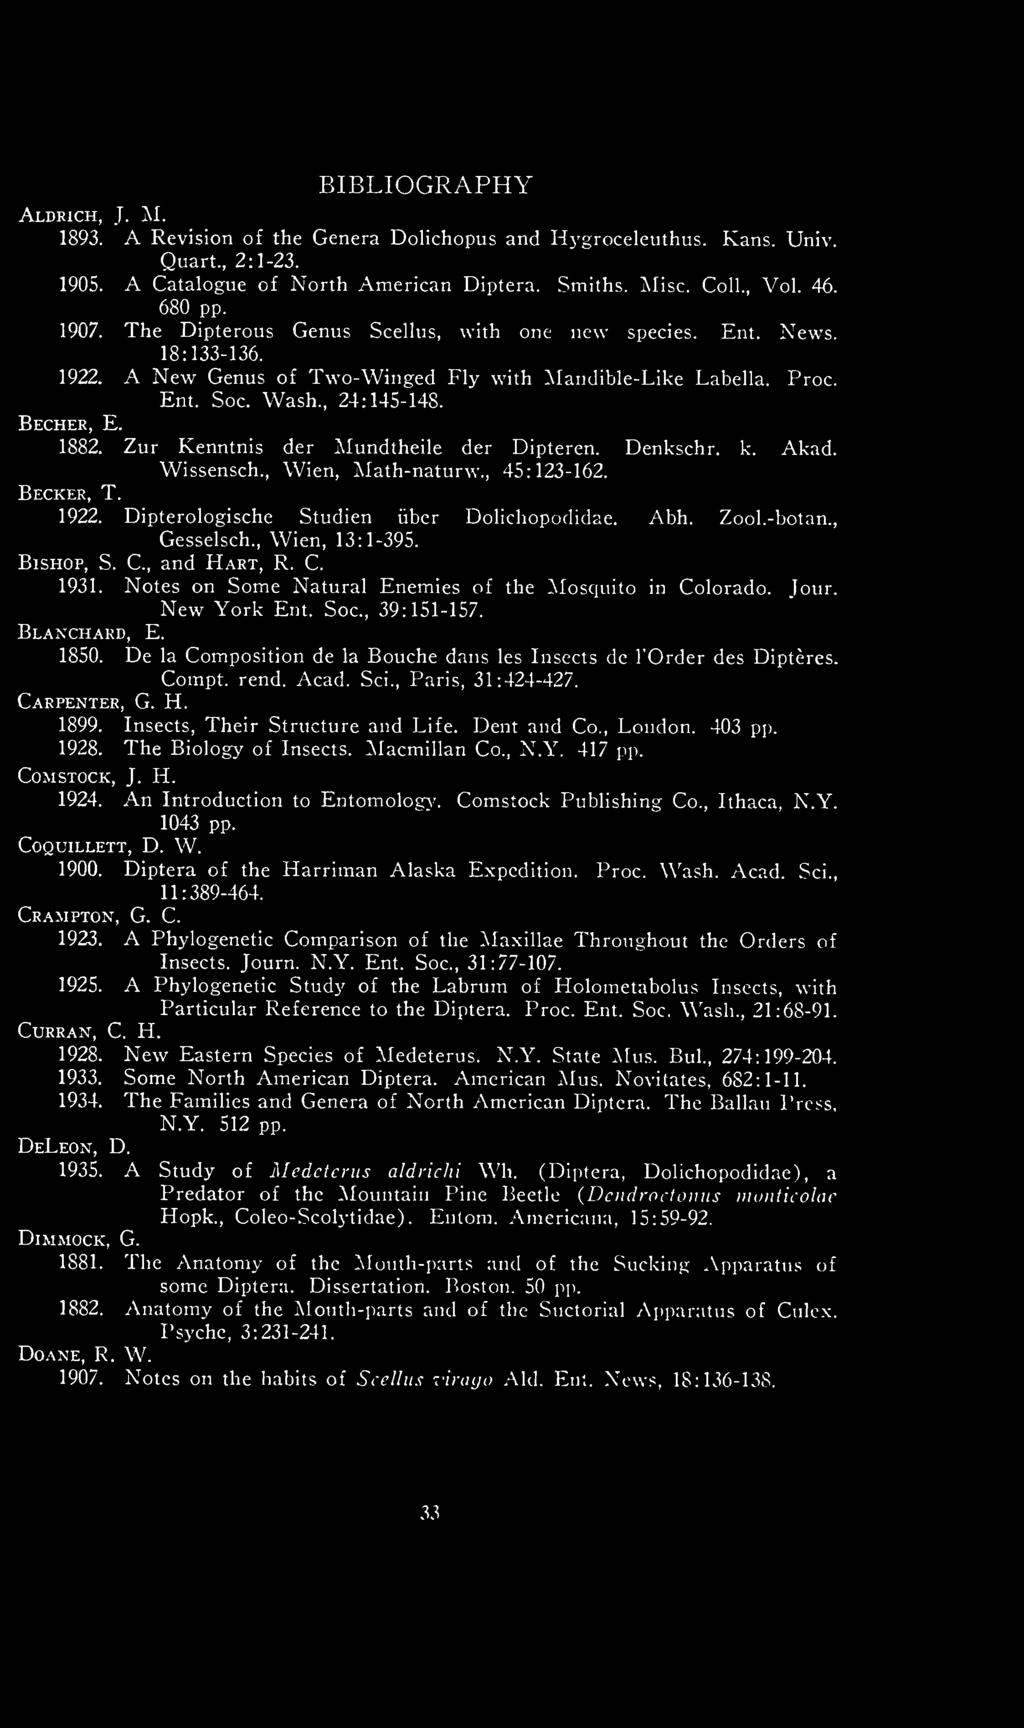 Aldrich, J. M. BIBLIOGRAPHY 1893. A Revision of the Genera Dolichopus and Hygroceleuthus. Kans. Univ. Quart., 2:1-23. 1905. A Catalogue of North American Diptera. Smiths. Misc. Coll., Vol. 46. 680 pp.